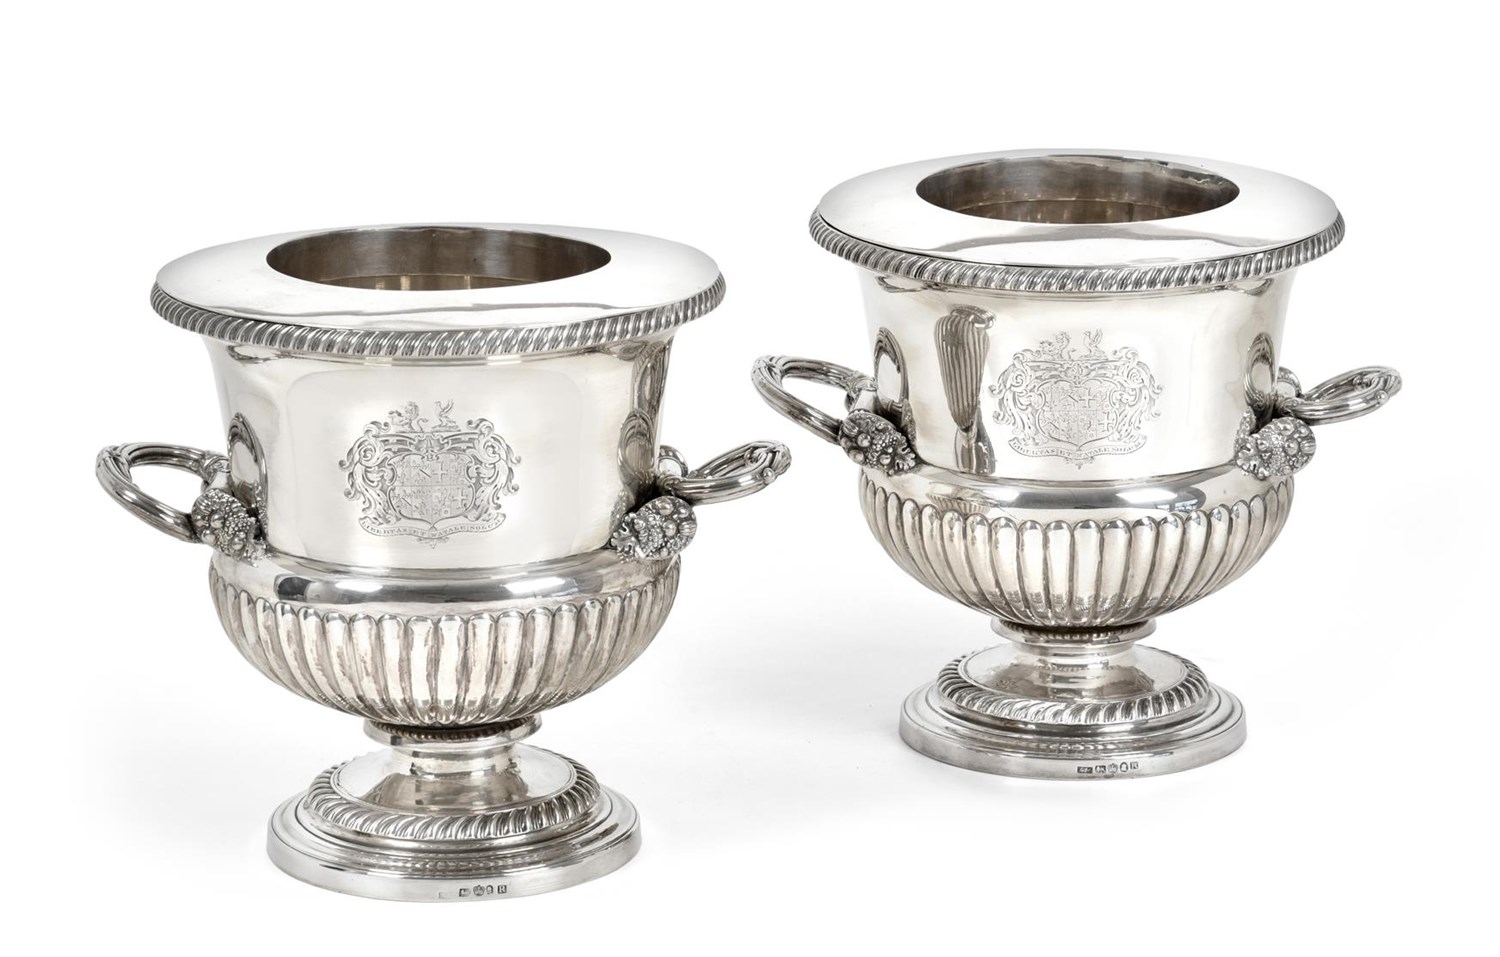 Lot 62 - A Pair of George III Silver Wine-Coolers, Collars and Liners, by Thomas and James Creswick,...